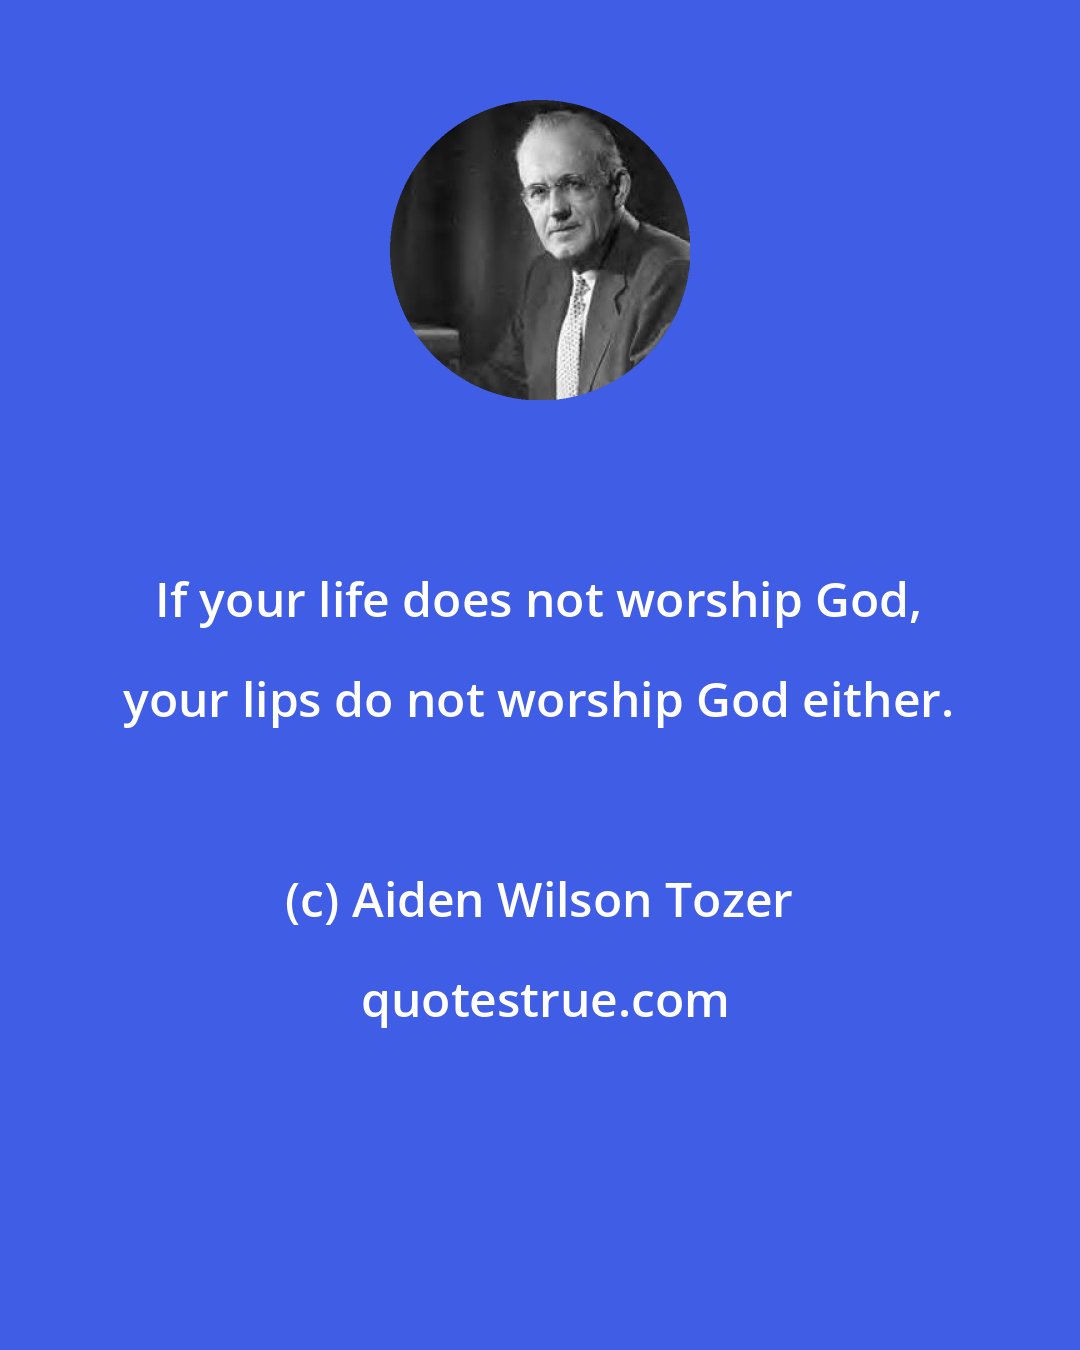 Aiden Wilson Tozer: If your life does not worship God, your lips do not worship God either.